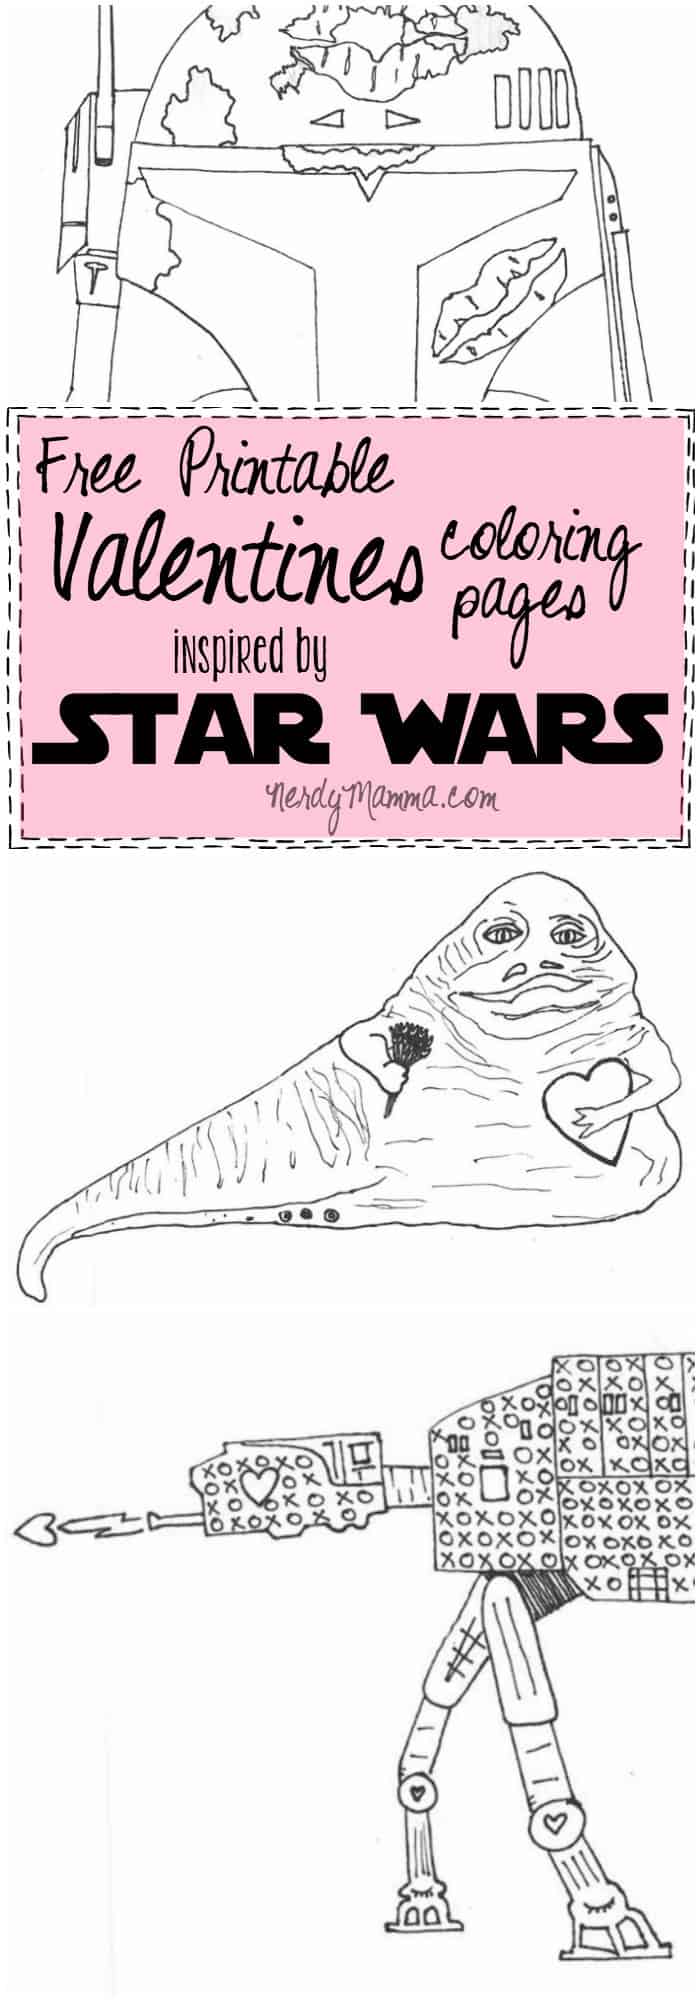 This is the nerdiest, but CUTEST set of valentines adult coloring pages...I mean, it's Star Wars inspired...LOVE...Just love. And they're free printables. Even better.